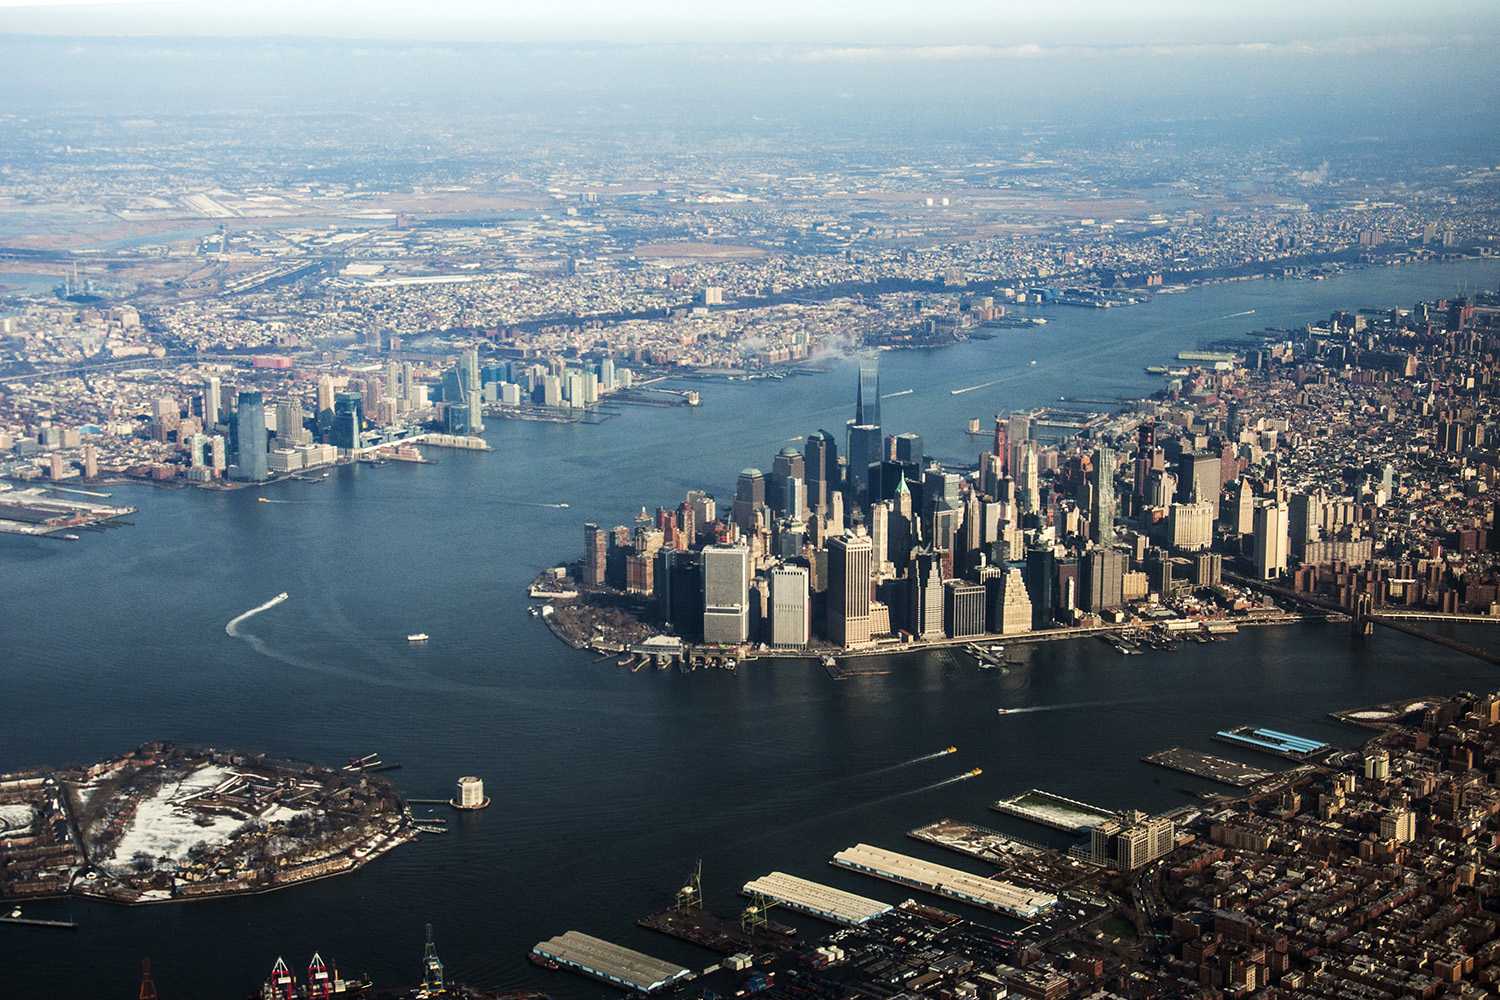 An aerial view of New York as the University Press photographers arrive in the city.